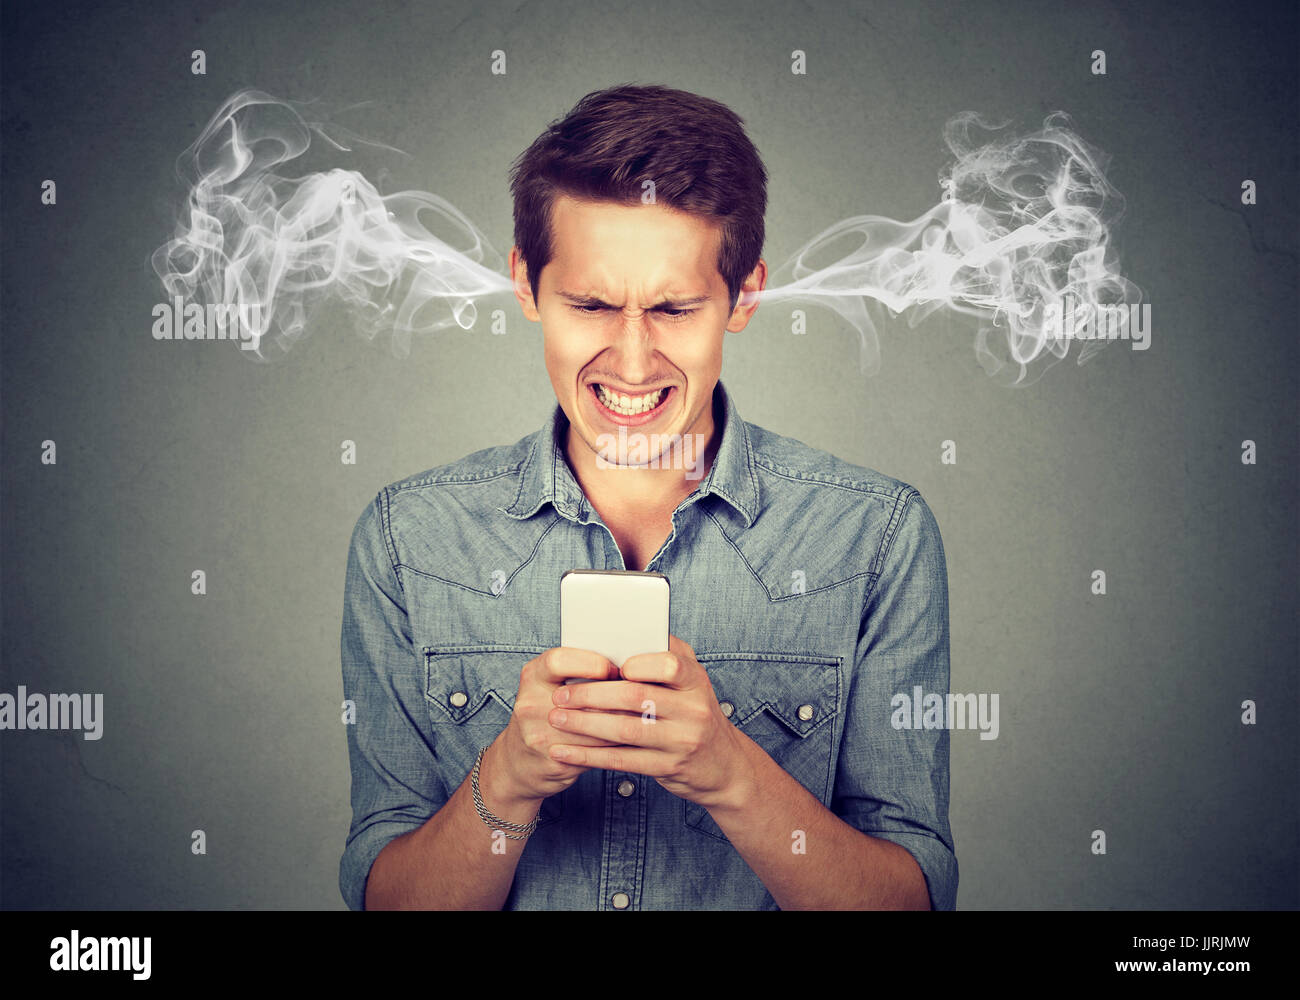 Frustrated angry man reading a text message on his smartphone blowing steam coming out of ears Stock Photo